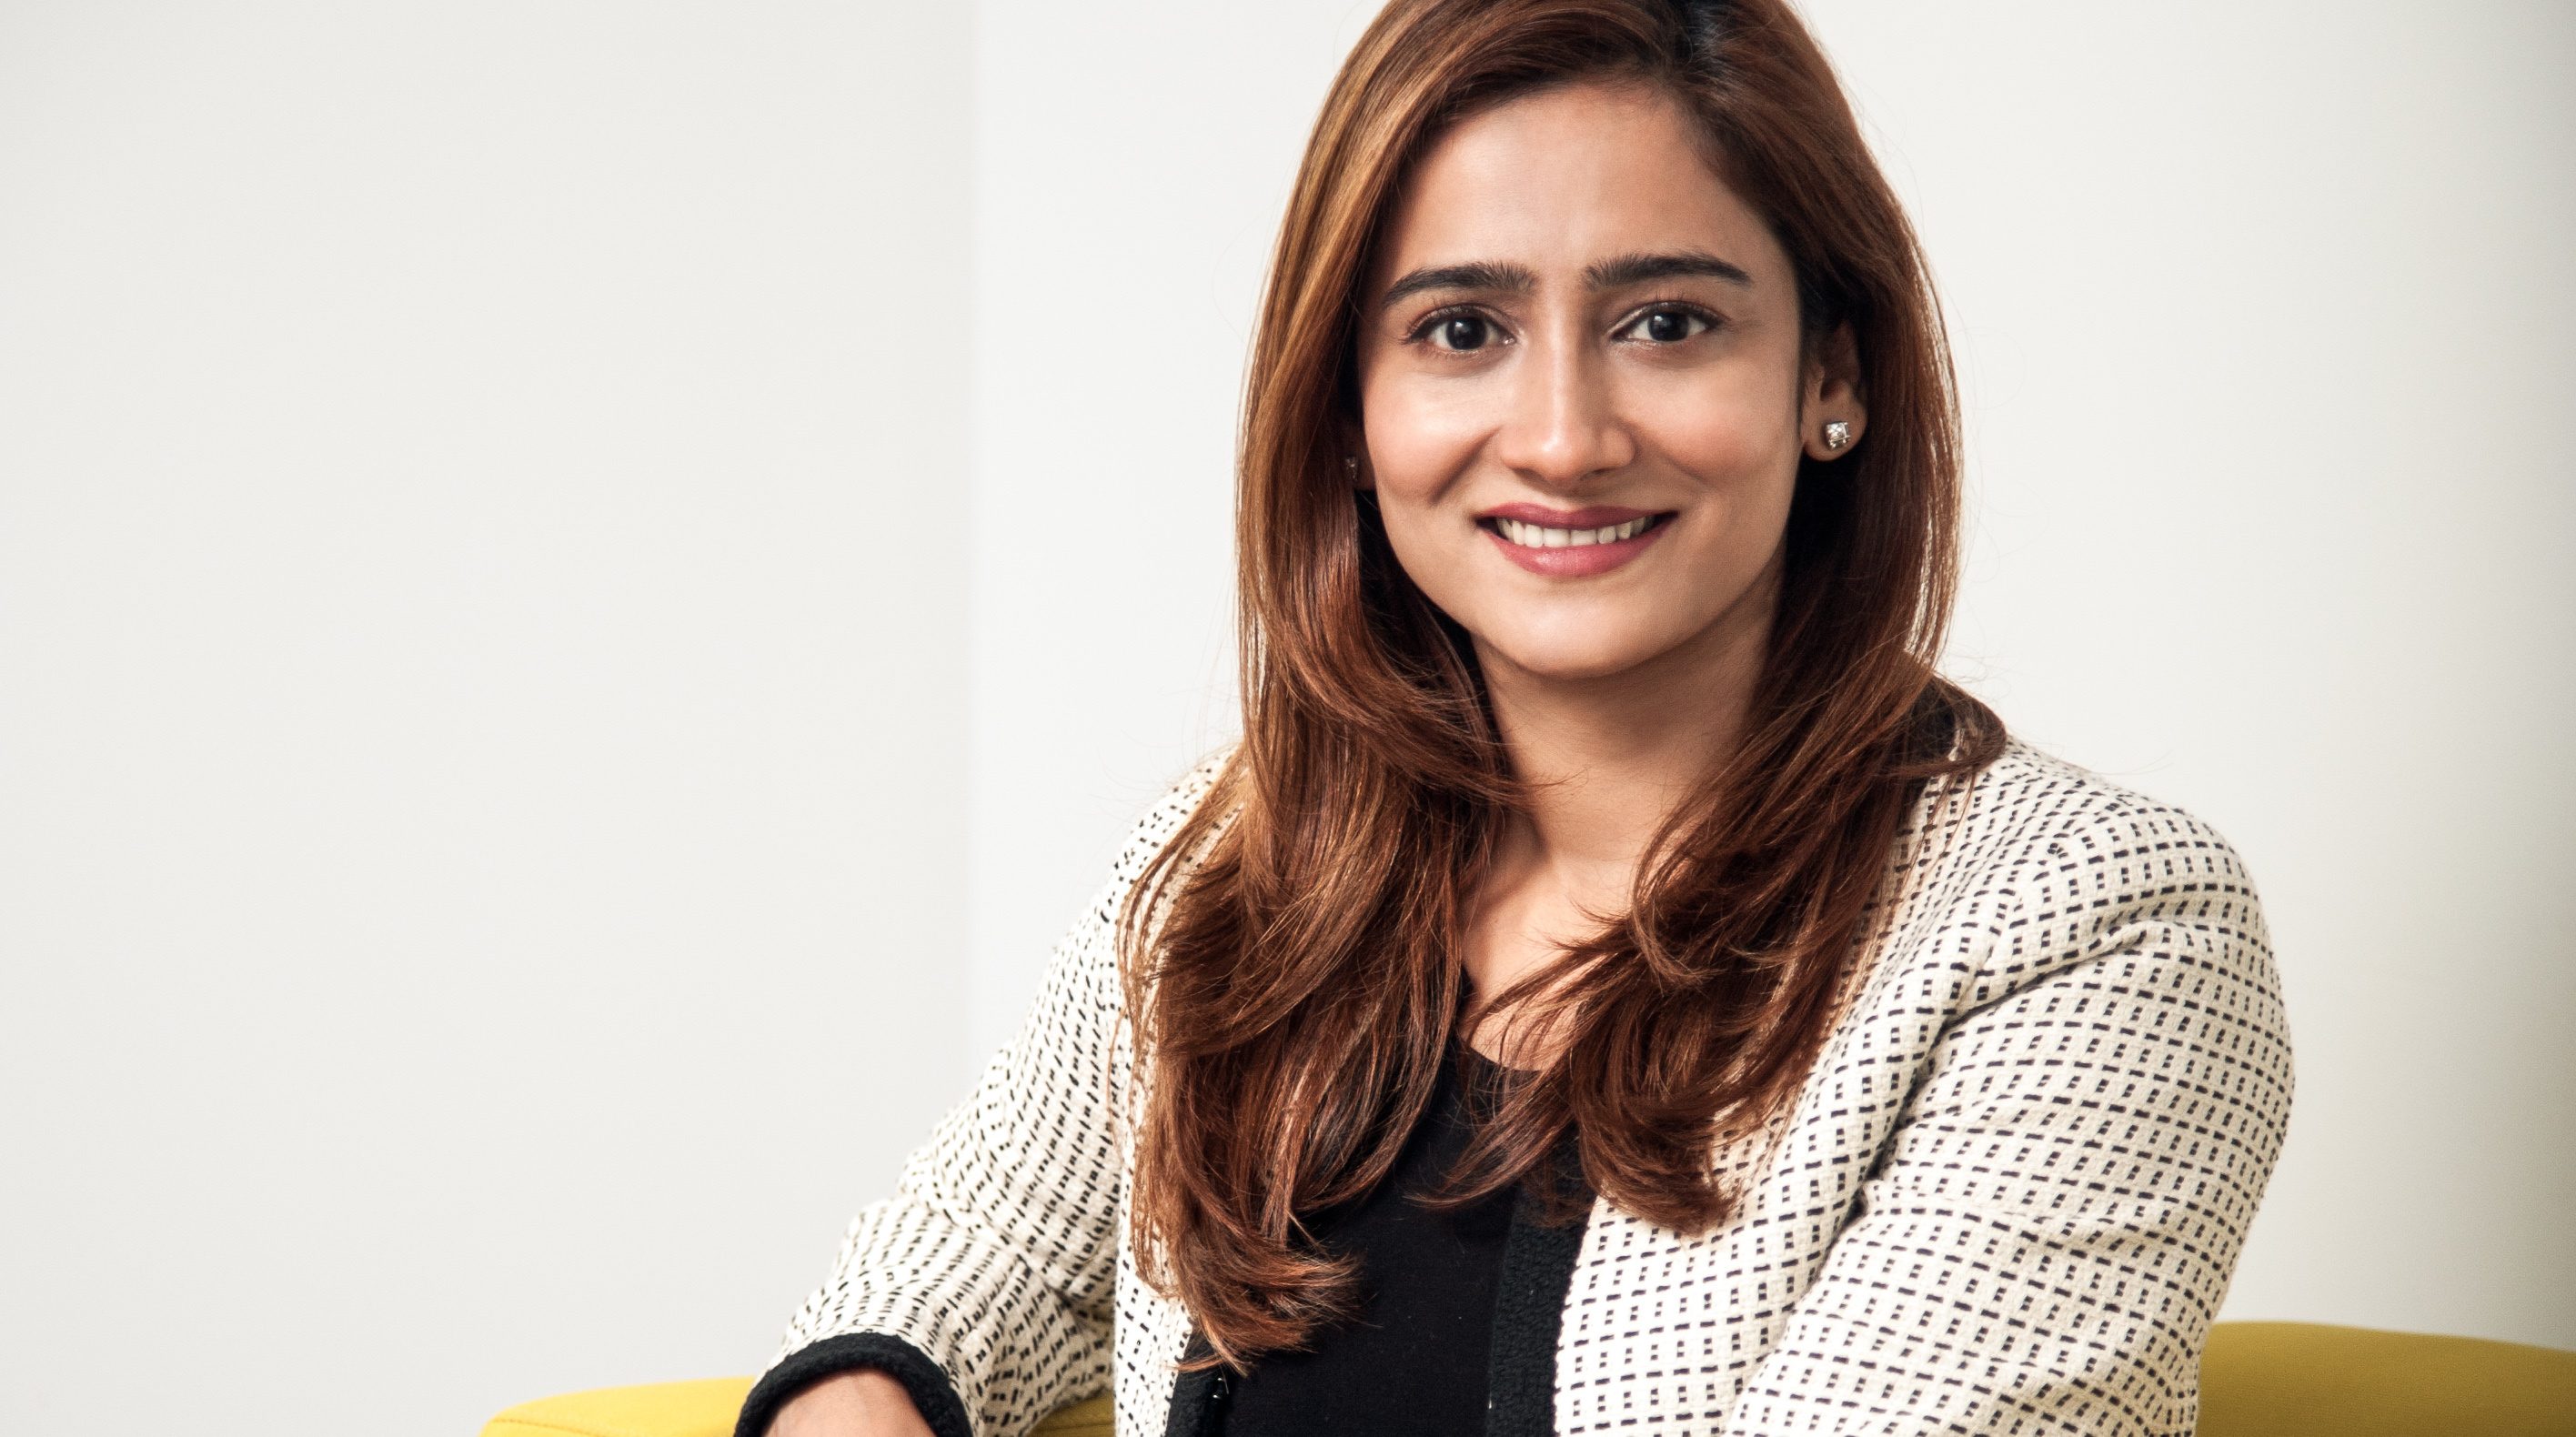 No glass ceiling for women in VC/PE, it's just percieved so: Cradle Seed Ventures CEO Dzuleira